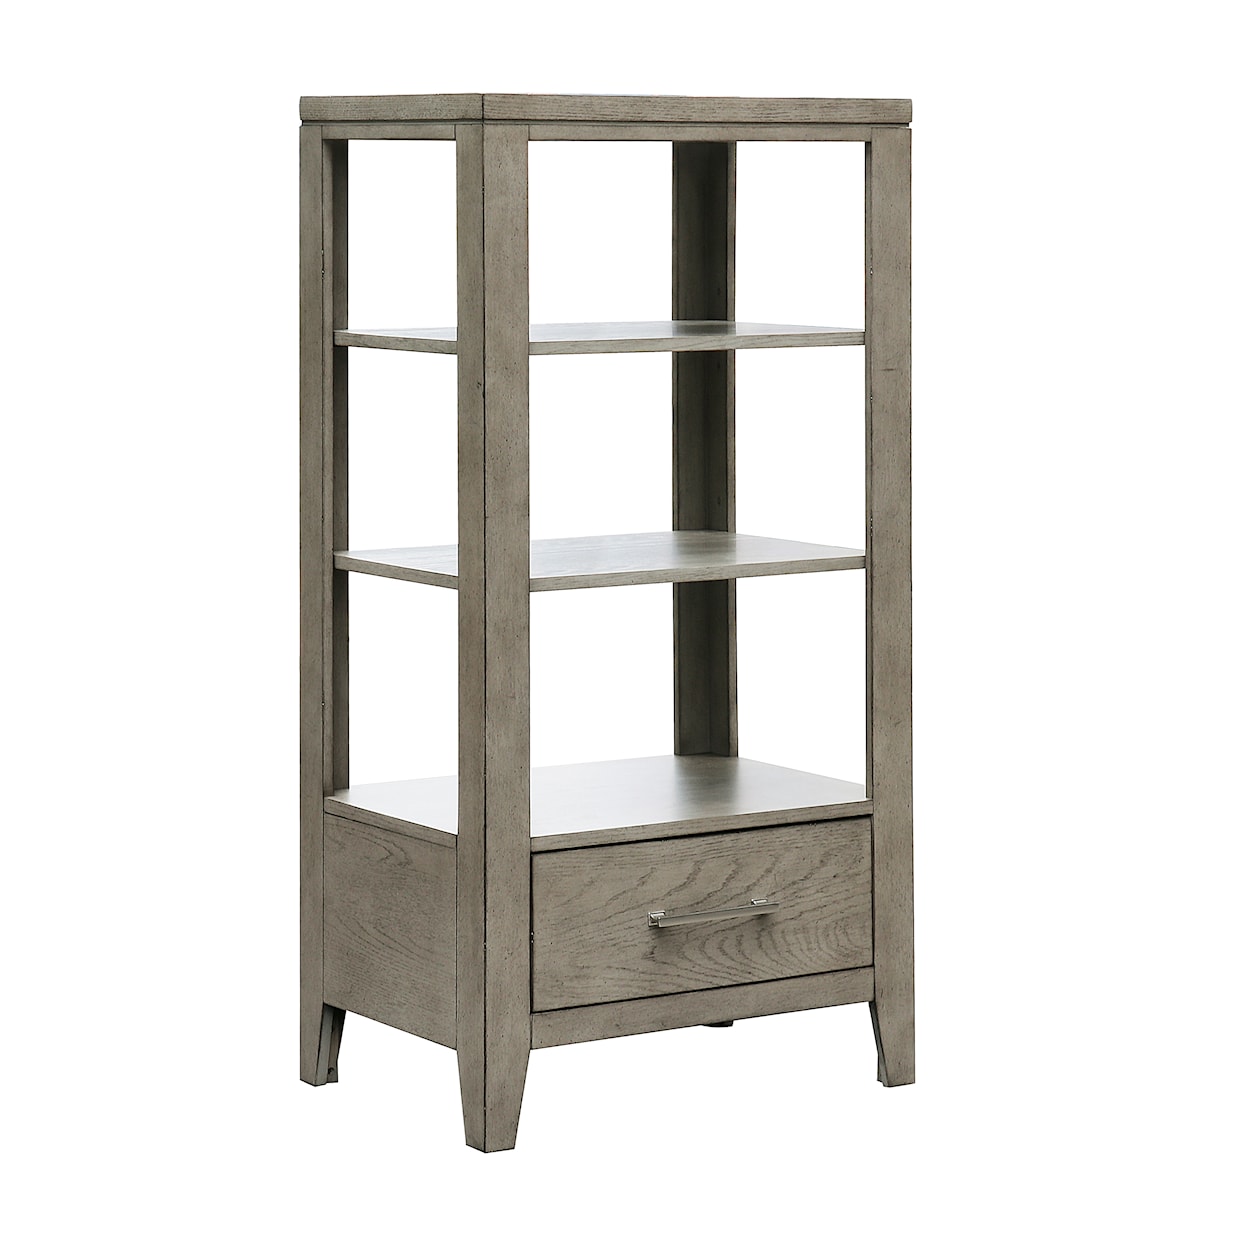 Samuel Lawrence Essex by Drew and Jonathan Home Essex Display Case